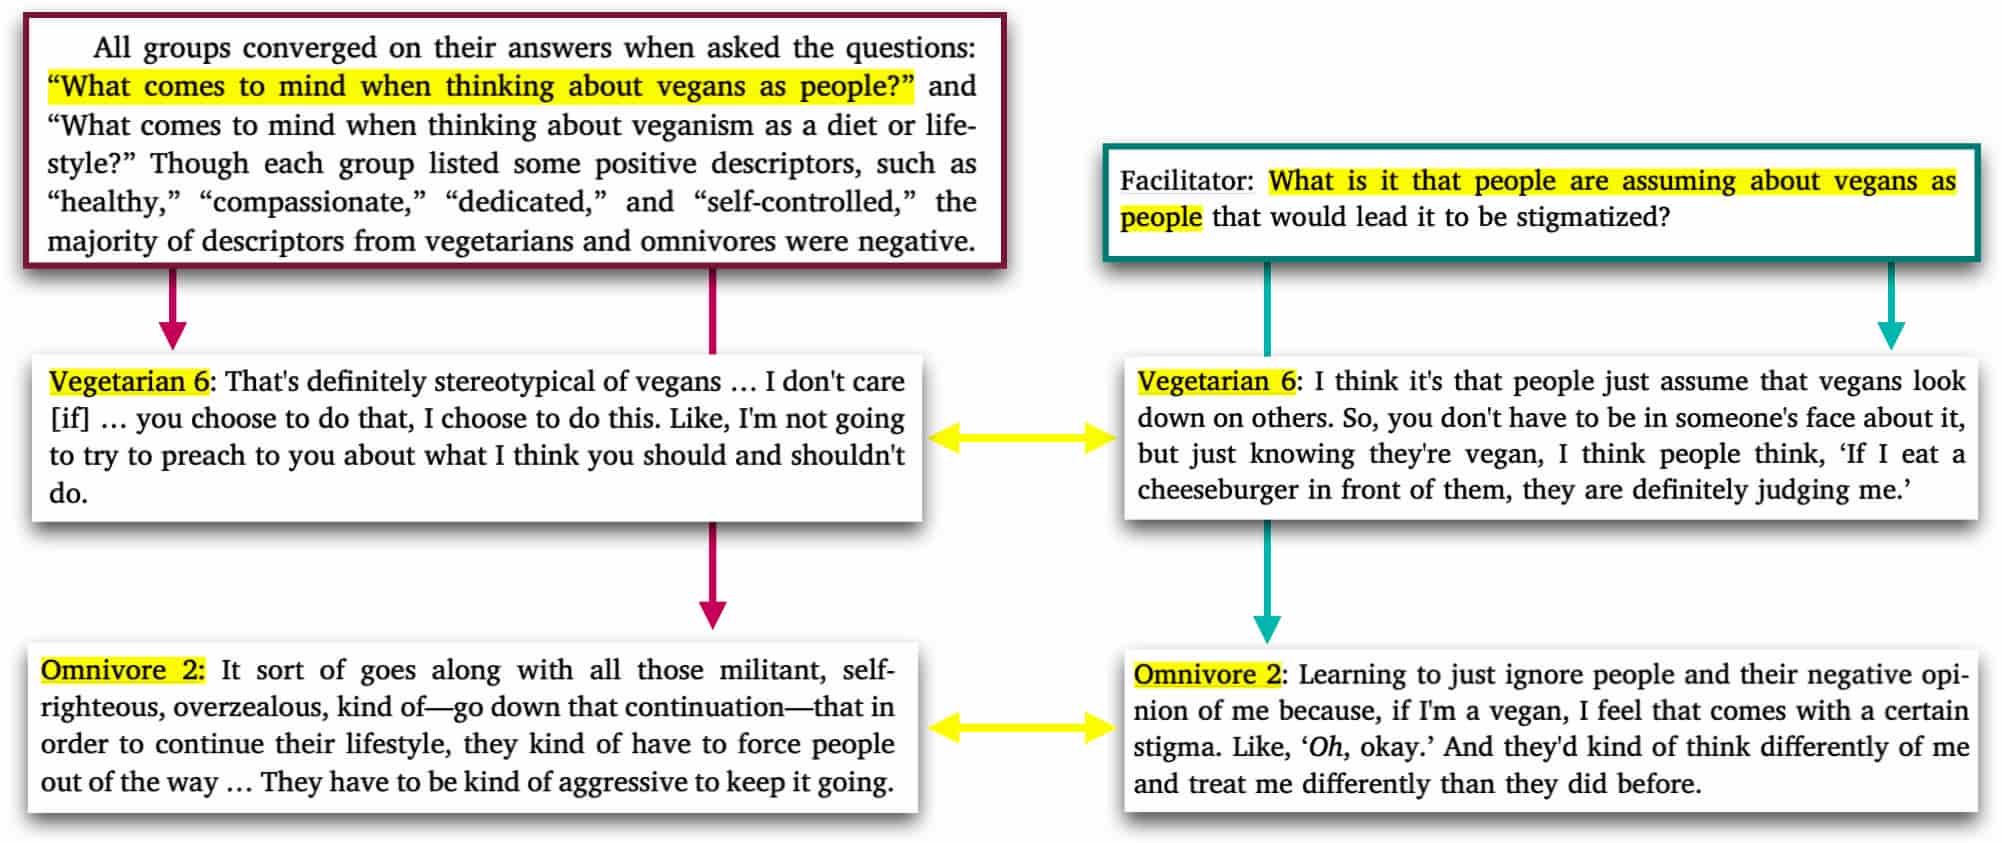 Facilitator questions and study participant responses from a vegetarian and omnivore first voicing stereotyping of vegans, then empathy with vegans' experience.